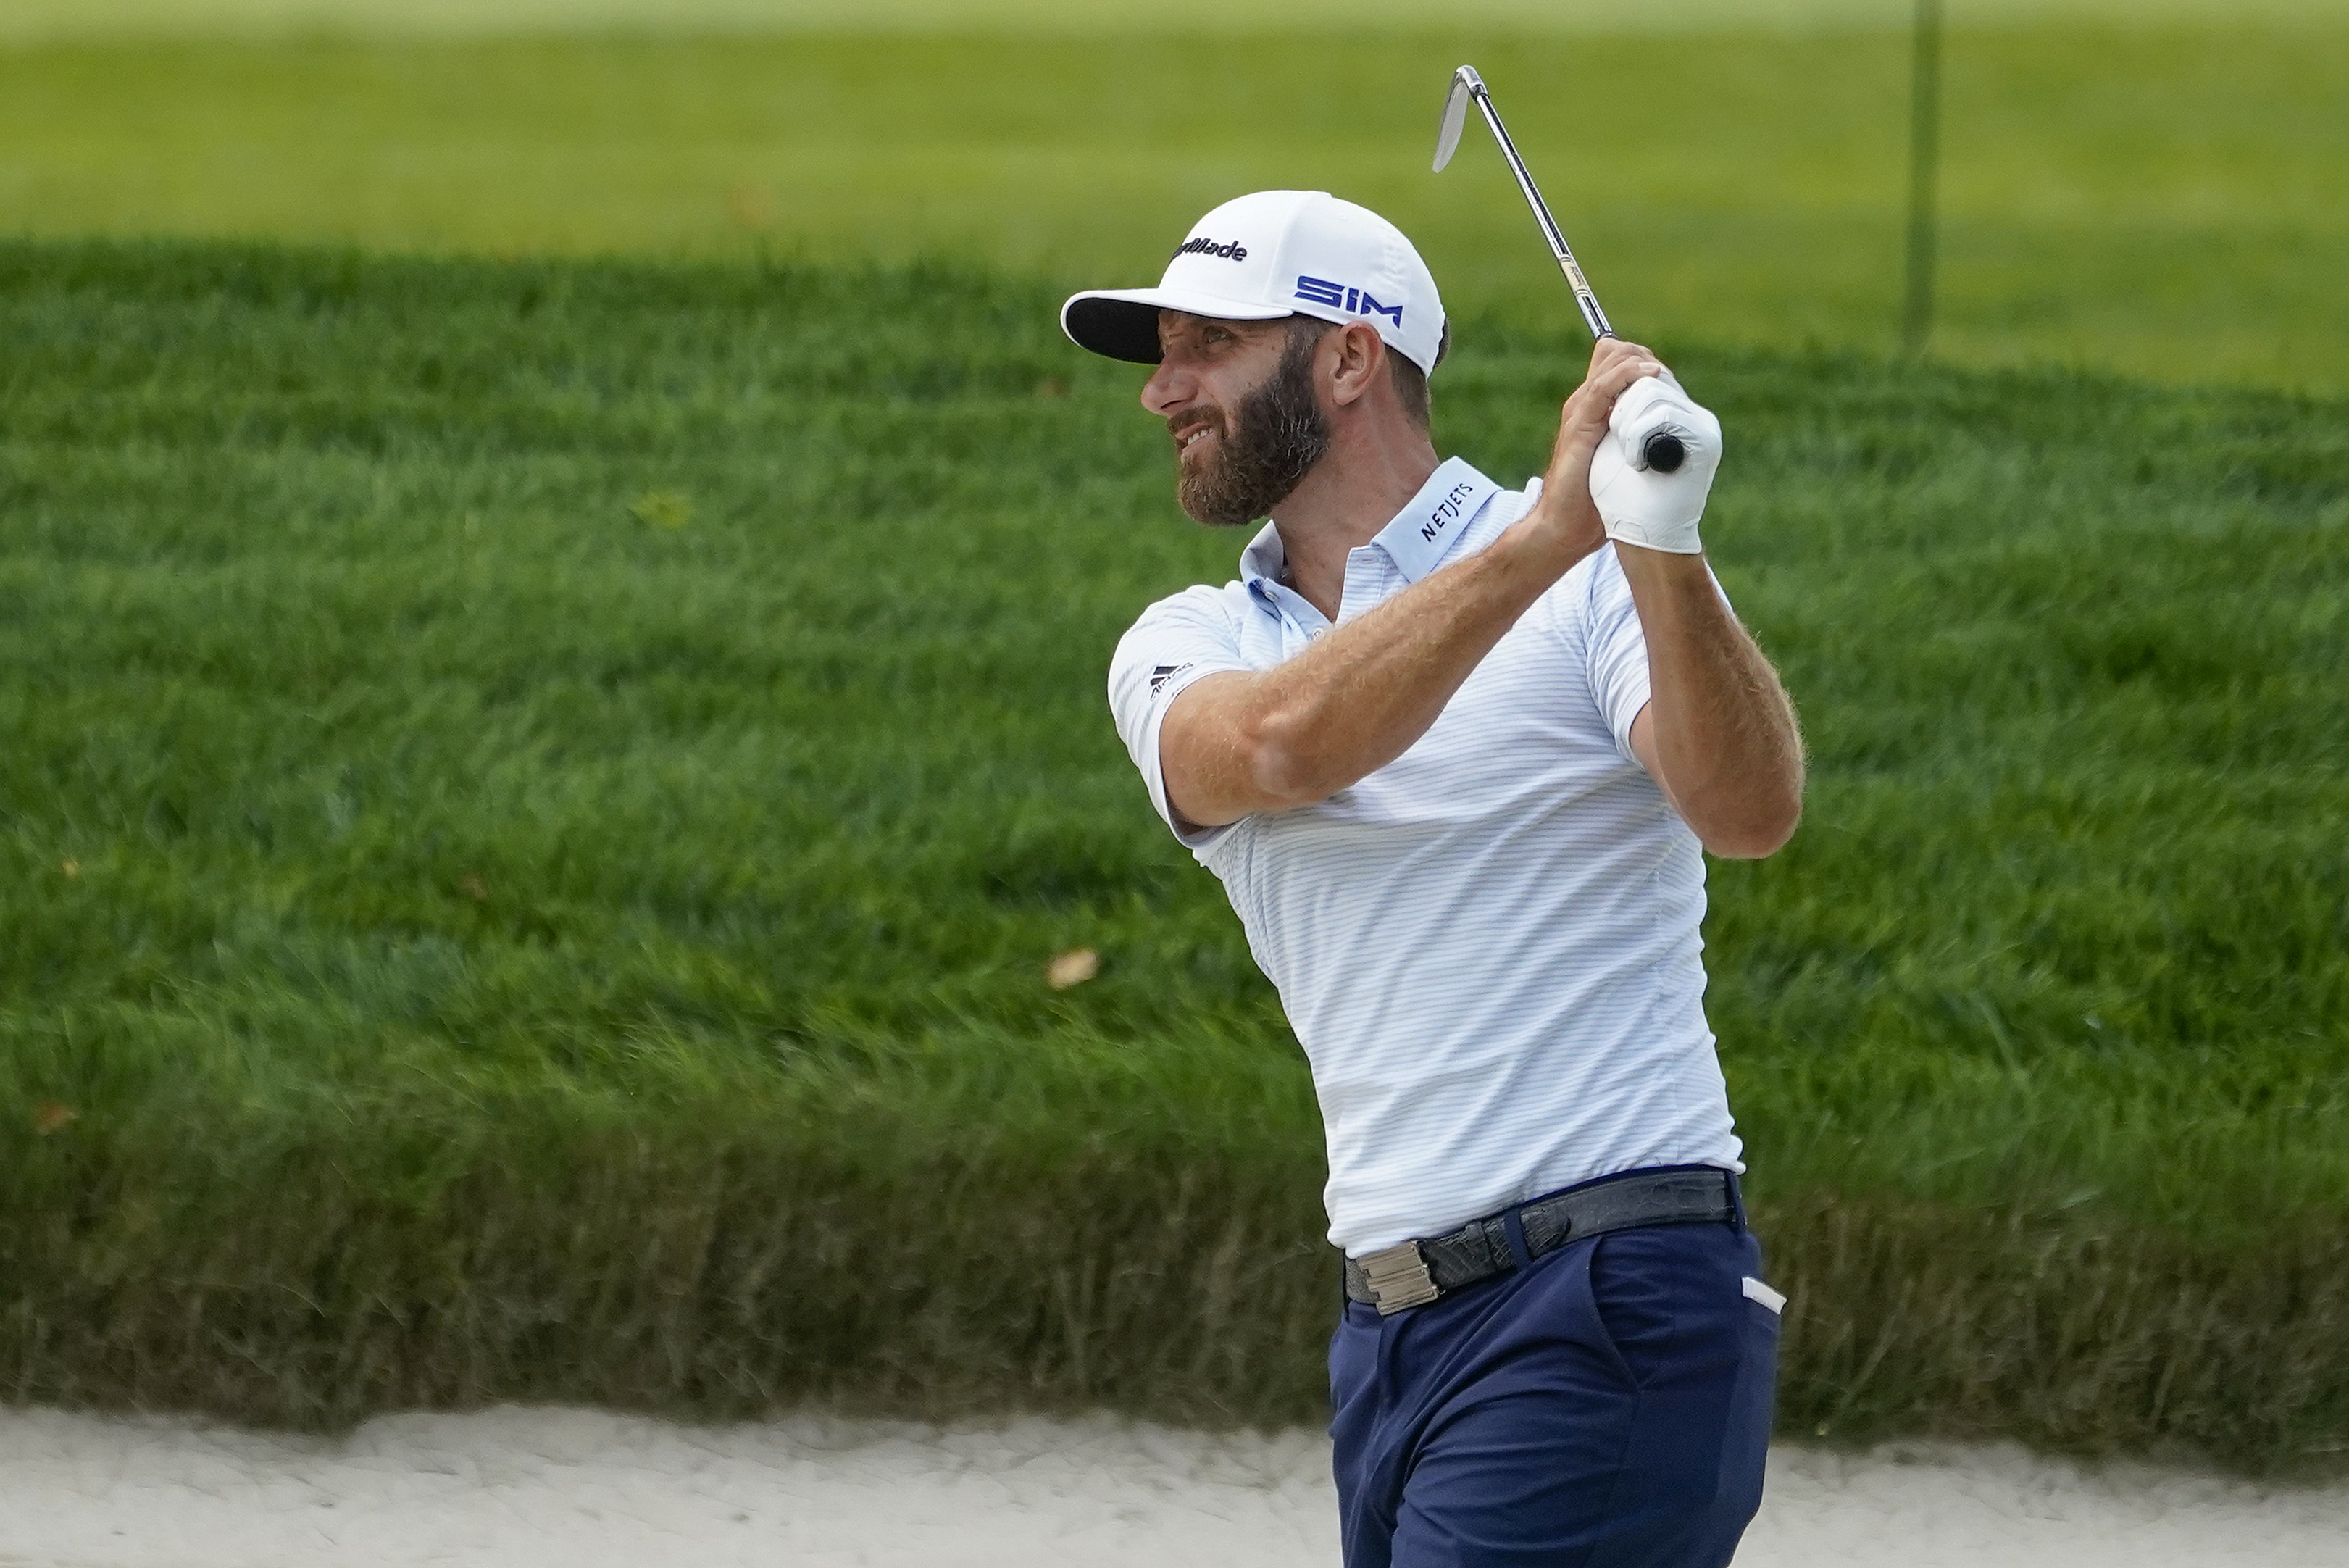 US Open 2020 1st round FREE LIVE STREAM (9/17/20) Watch Tiger Woods, Dustin Johnson at Winged Foot Golf Club online Time, TV, channel